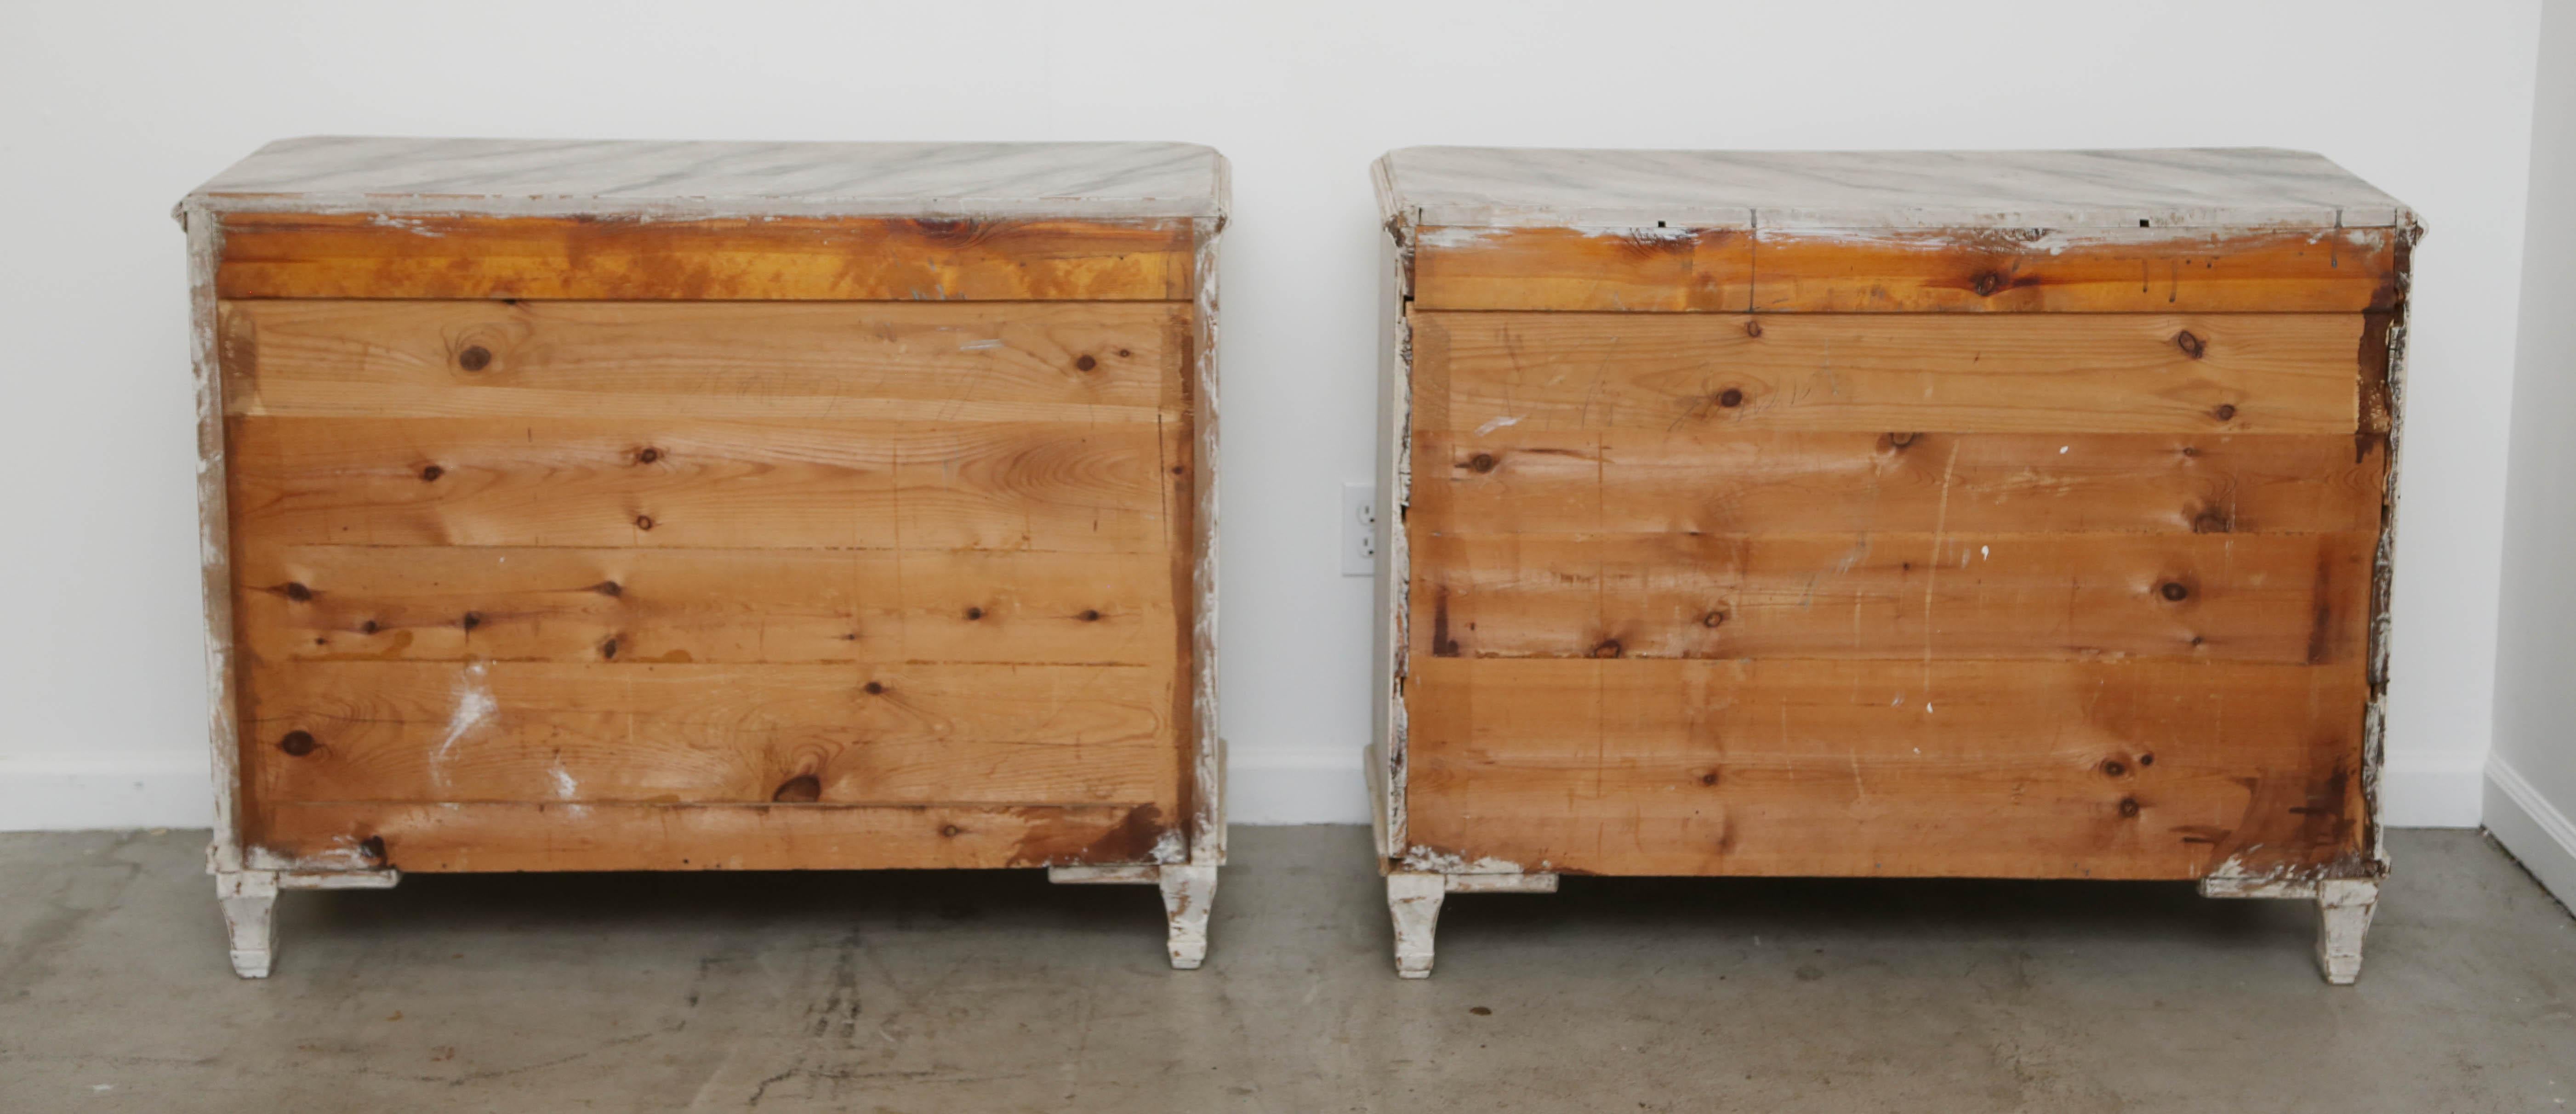 Large Pair of Antique Swedish Gustavian Style Painted Chests, 19th Century 1